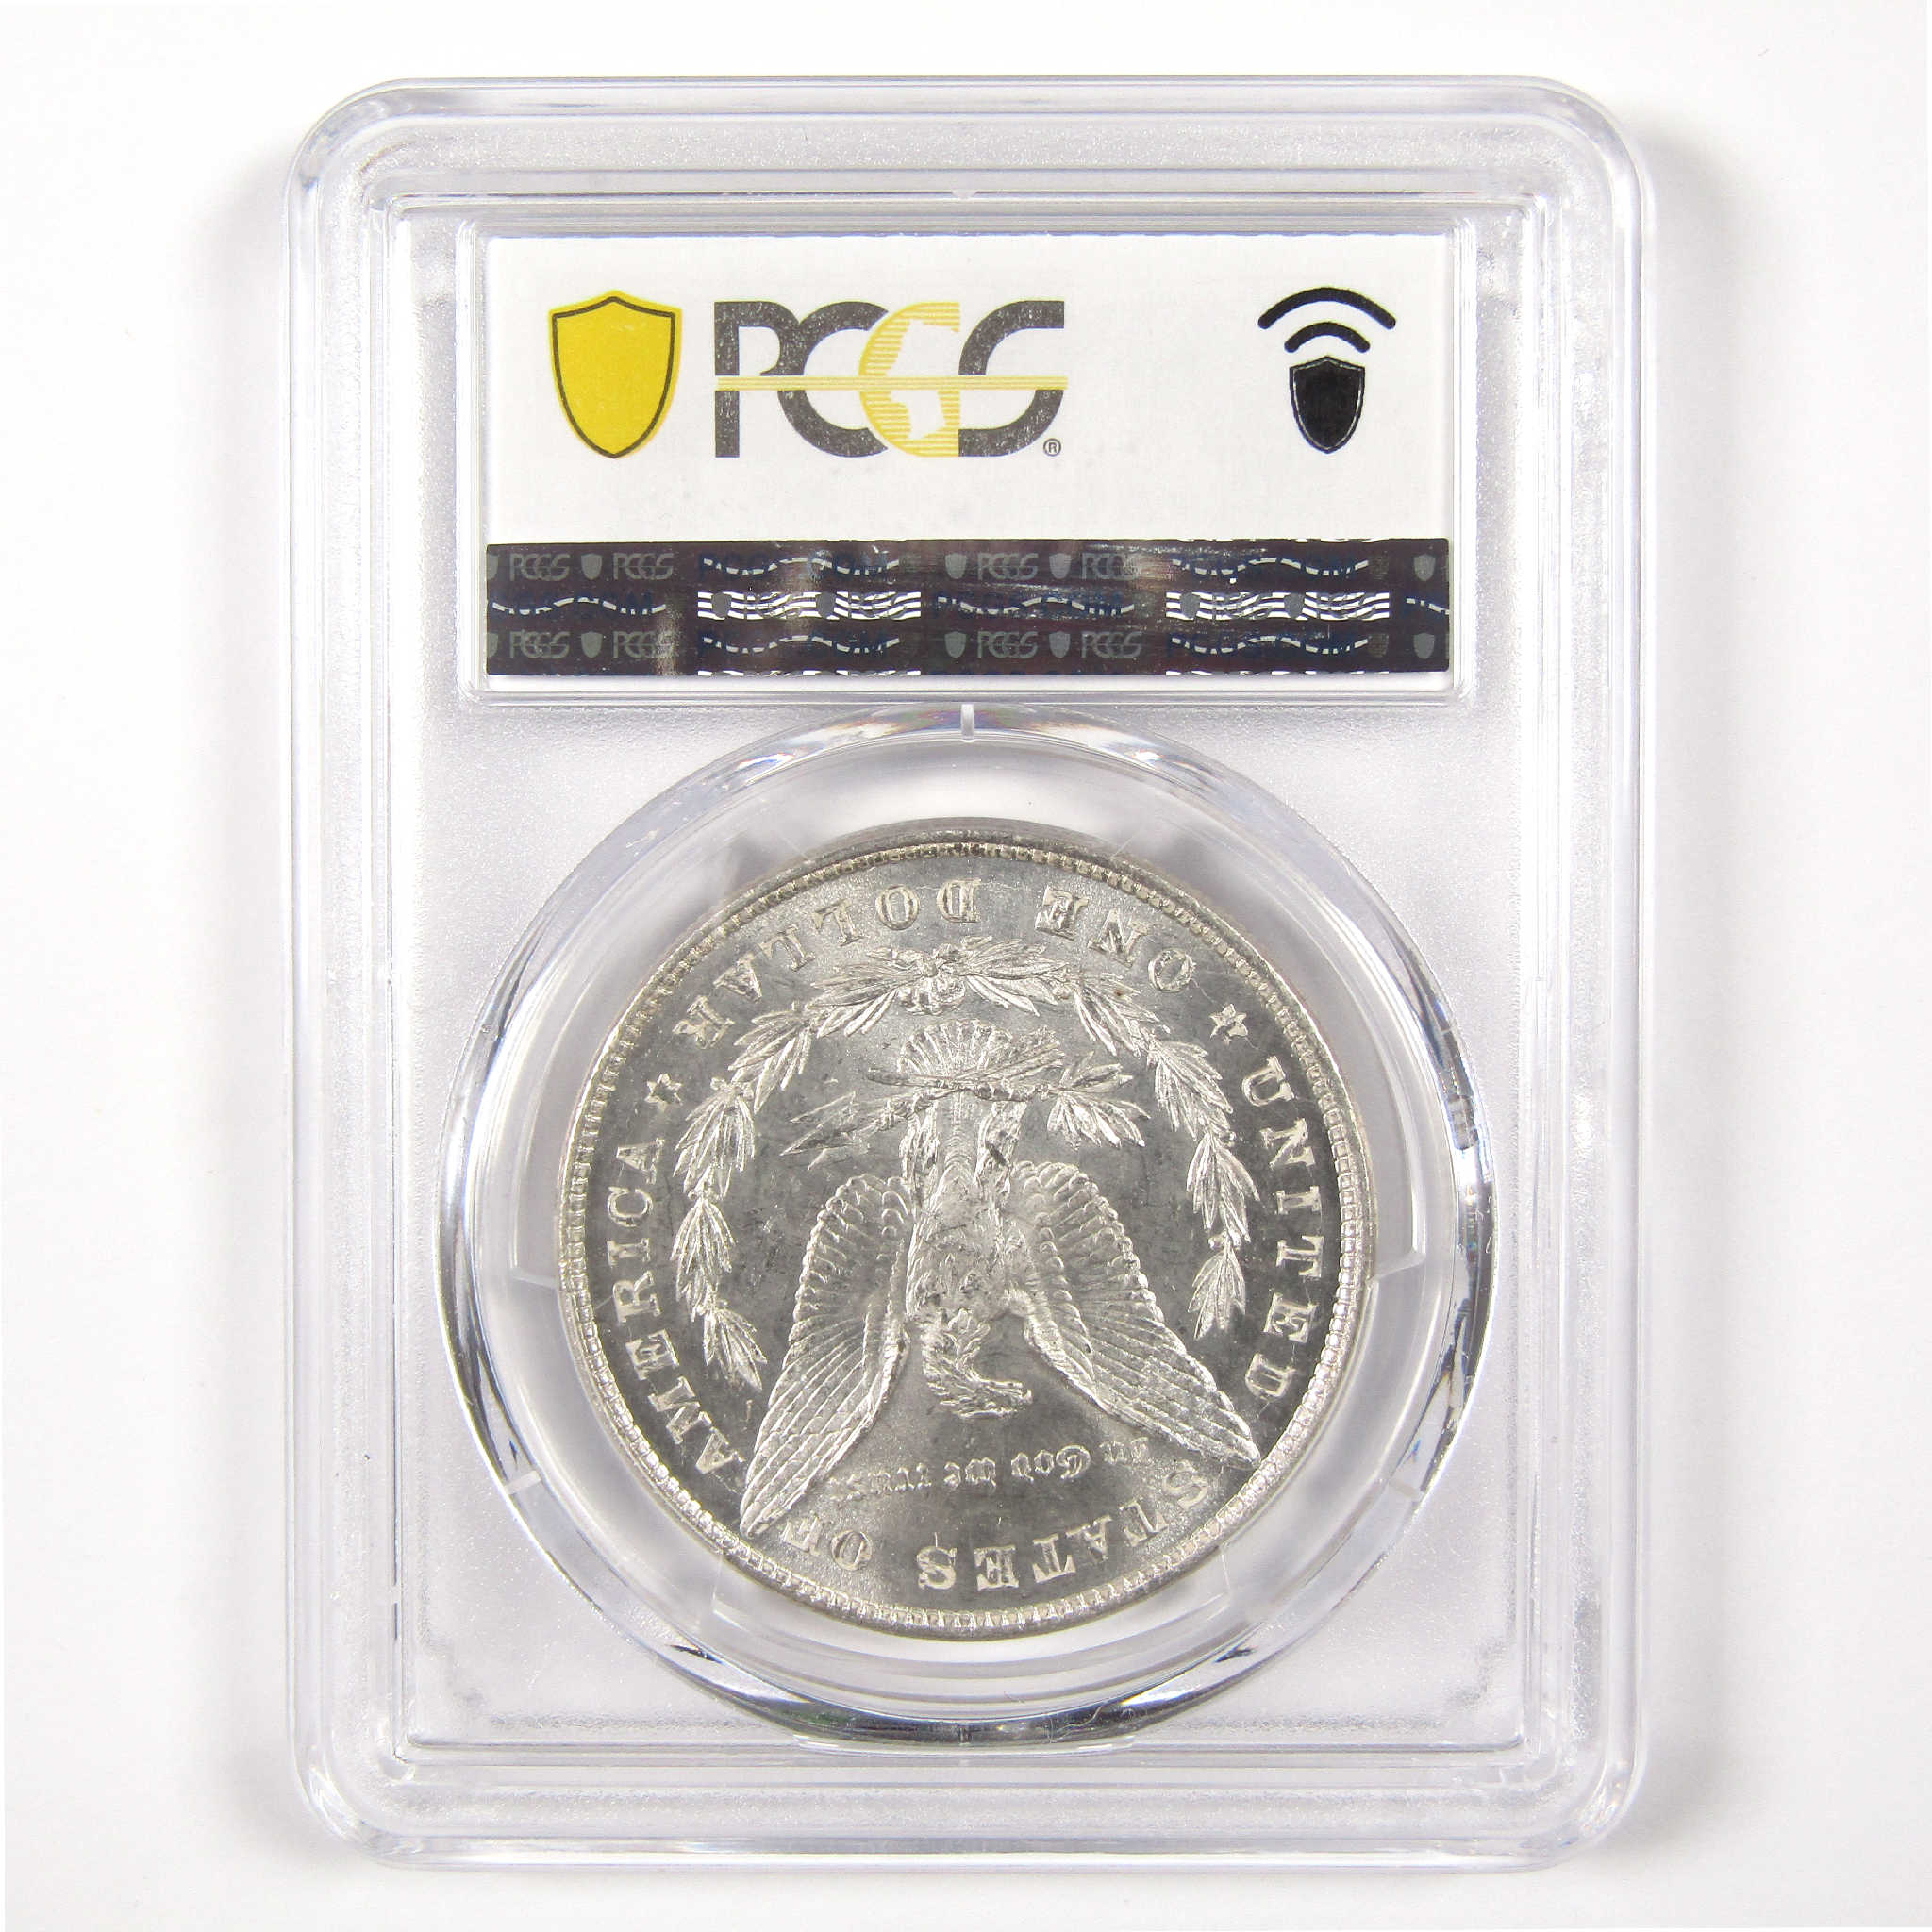 1878 8TF Morgan Dollar MS 62 PCGS Silver $1 Uncirculated SKU:I11337 - Morgan coin - Morgan silver dollar - Morgan silver dollar for sale - Profile Coins &amp; Collectibles